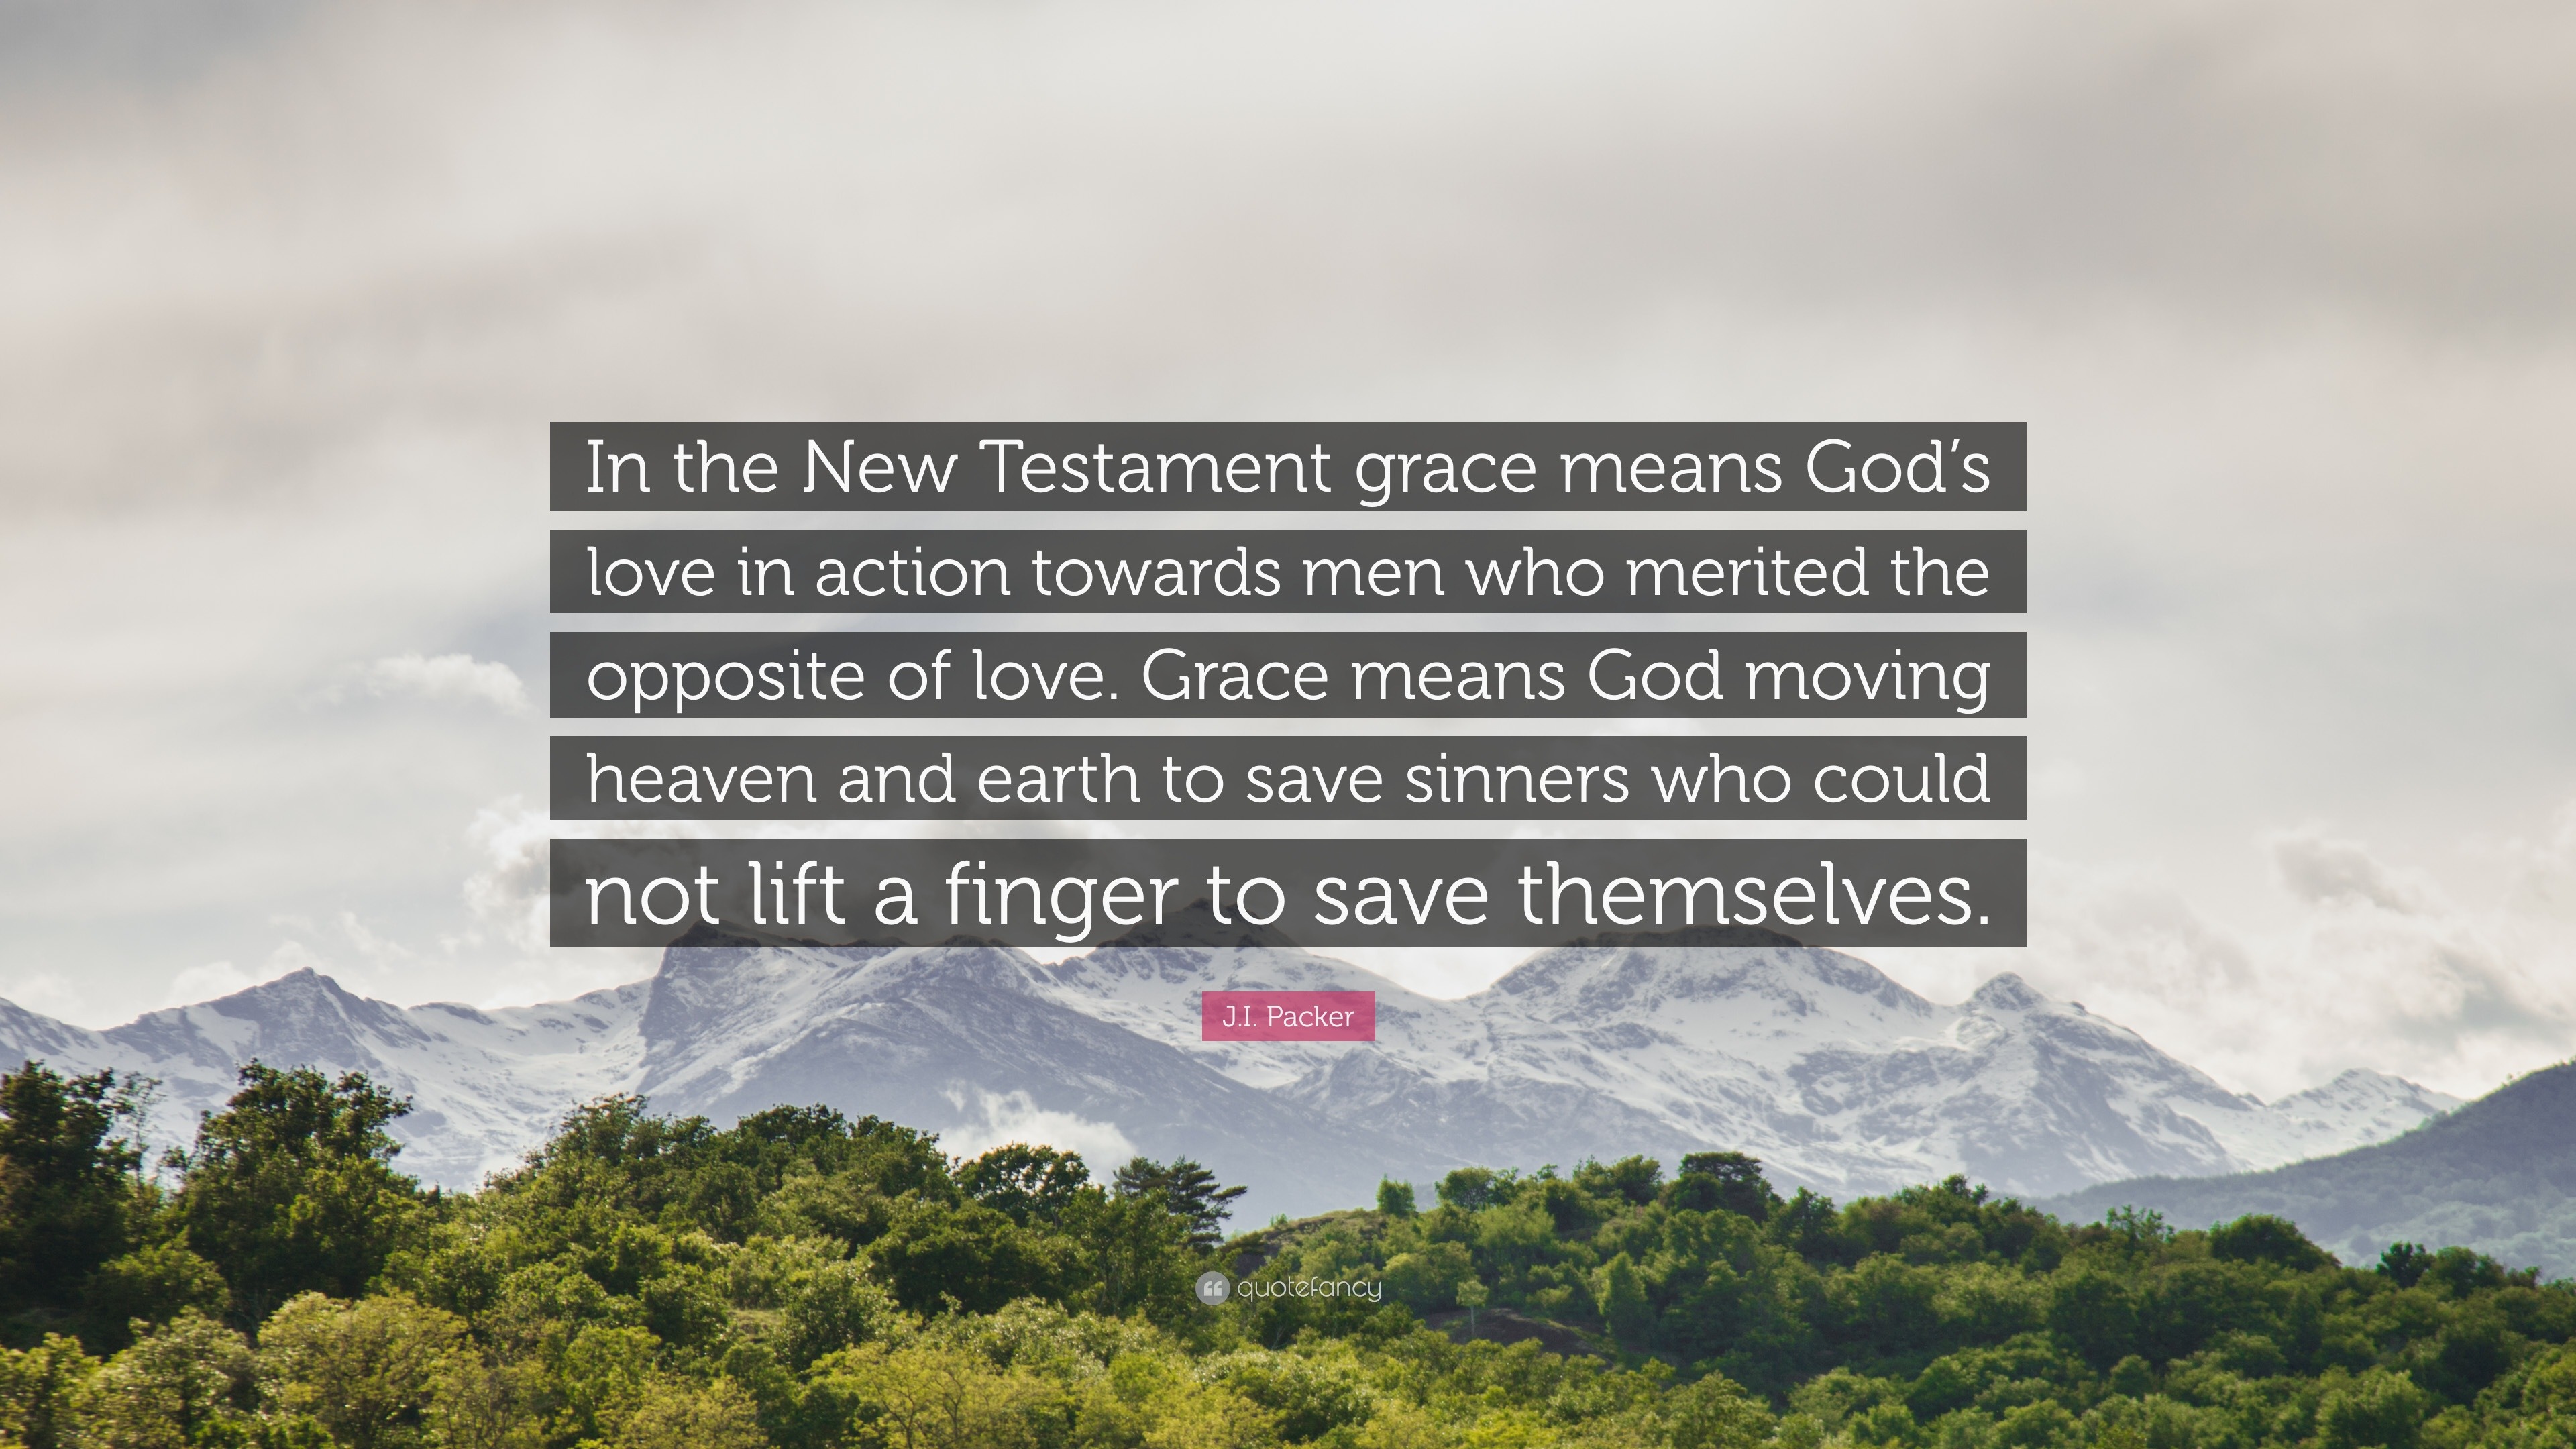 J I Packer Quote “In the New Testament grace means God s love in action towards